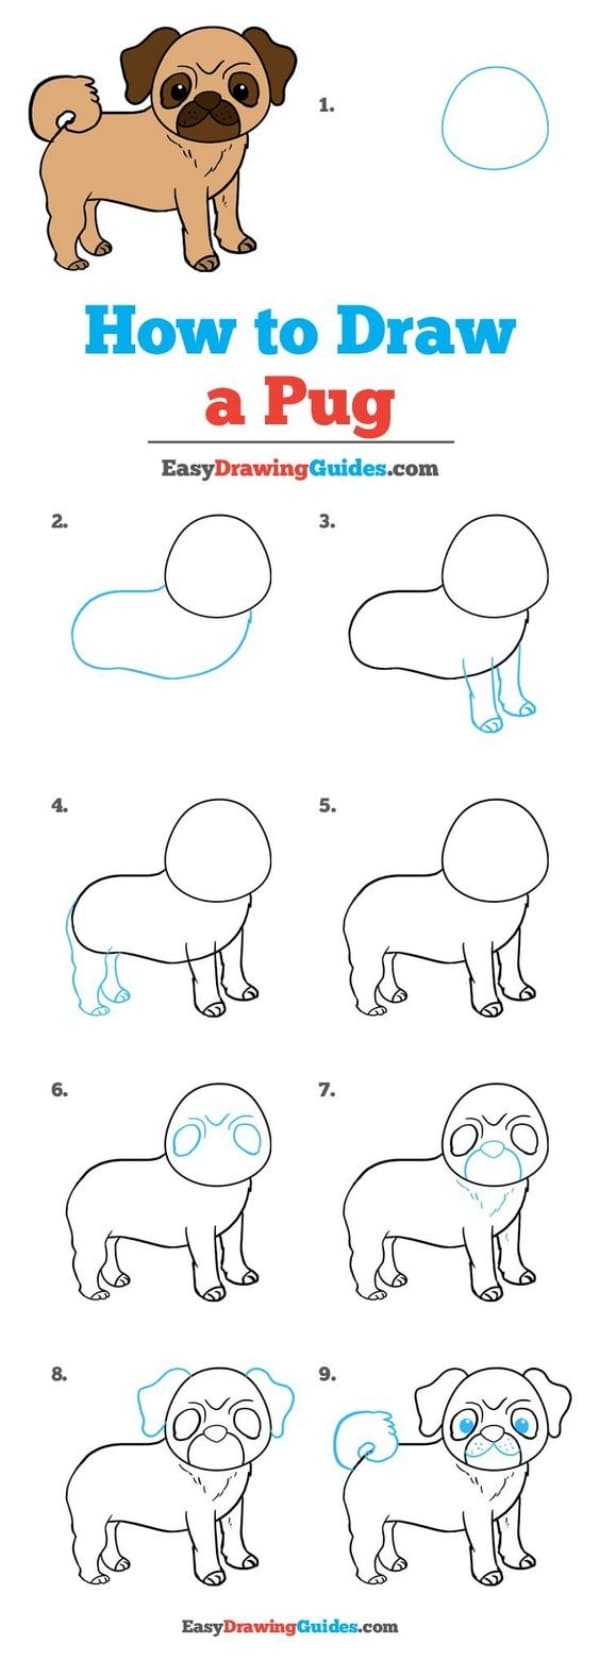 25 Easy Ways of How to Draw a Dog